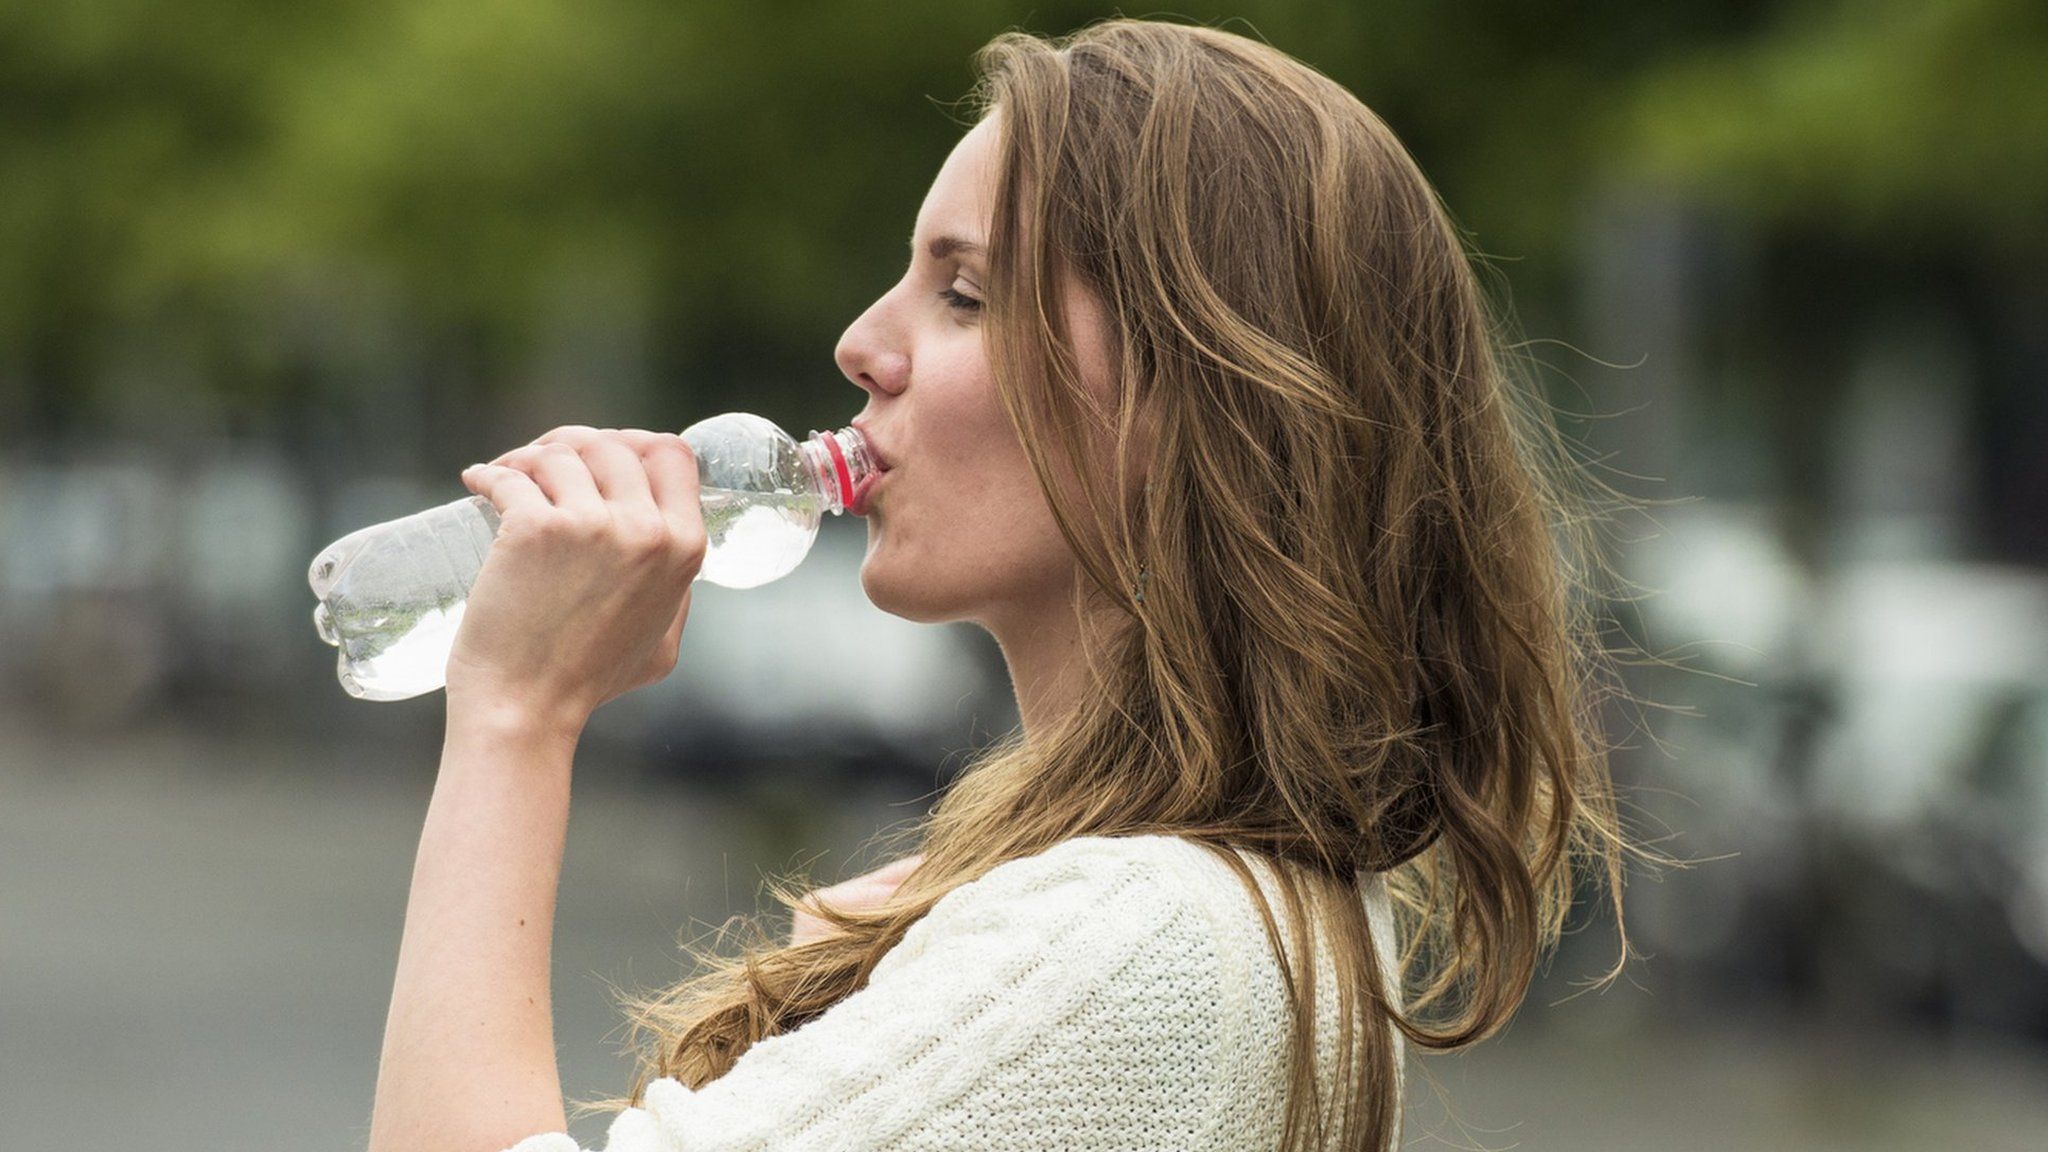 woman drinking out of plastic bottle